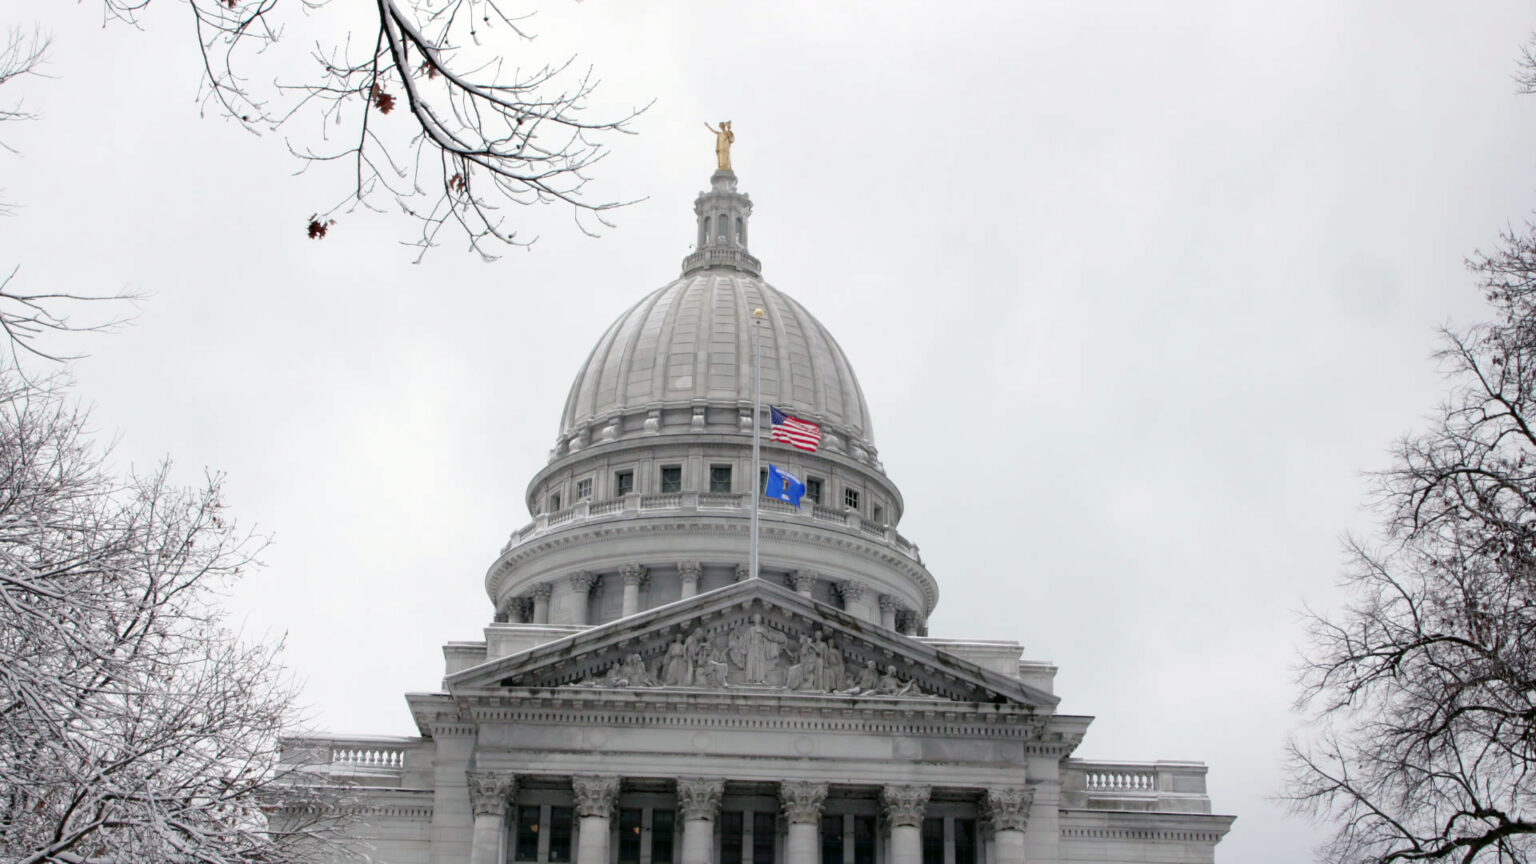 The U.S. and Wisconsin flags fly at half staff on a flagpole mounted to the top of a pediment on one wing of a marble masonry building with pillars, relief statuary and a dome topped by a statue, with snow-covered tree branches on either side and in the foreground, under an overcast sky.